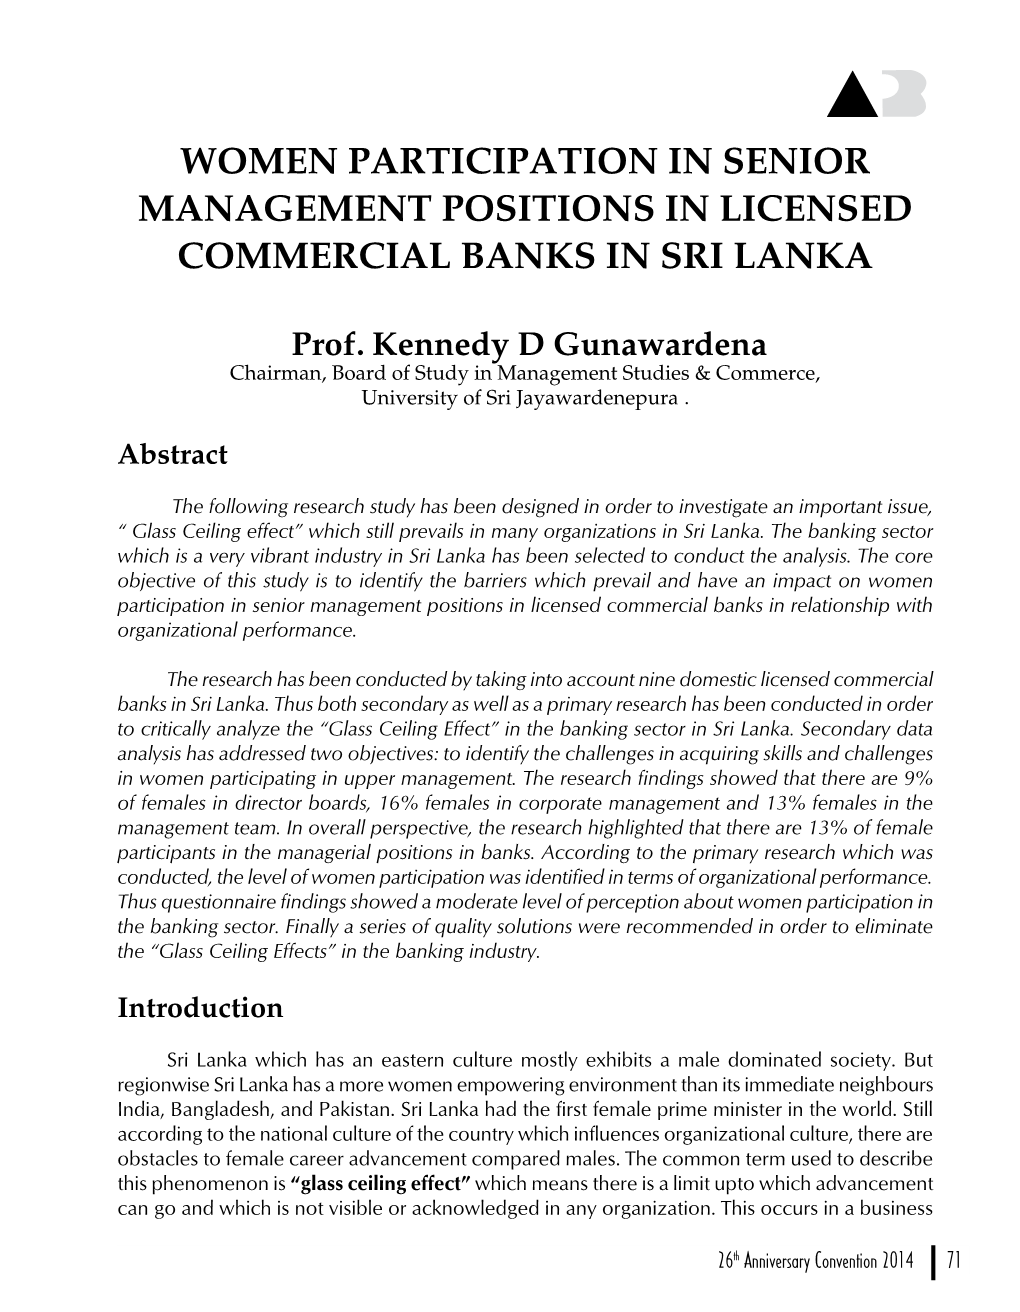 Women Participation in Senior Management Positions in Licensed Commercial Banks in Sri Lanka